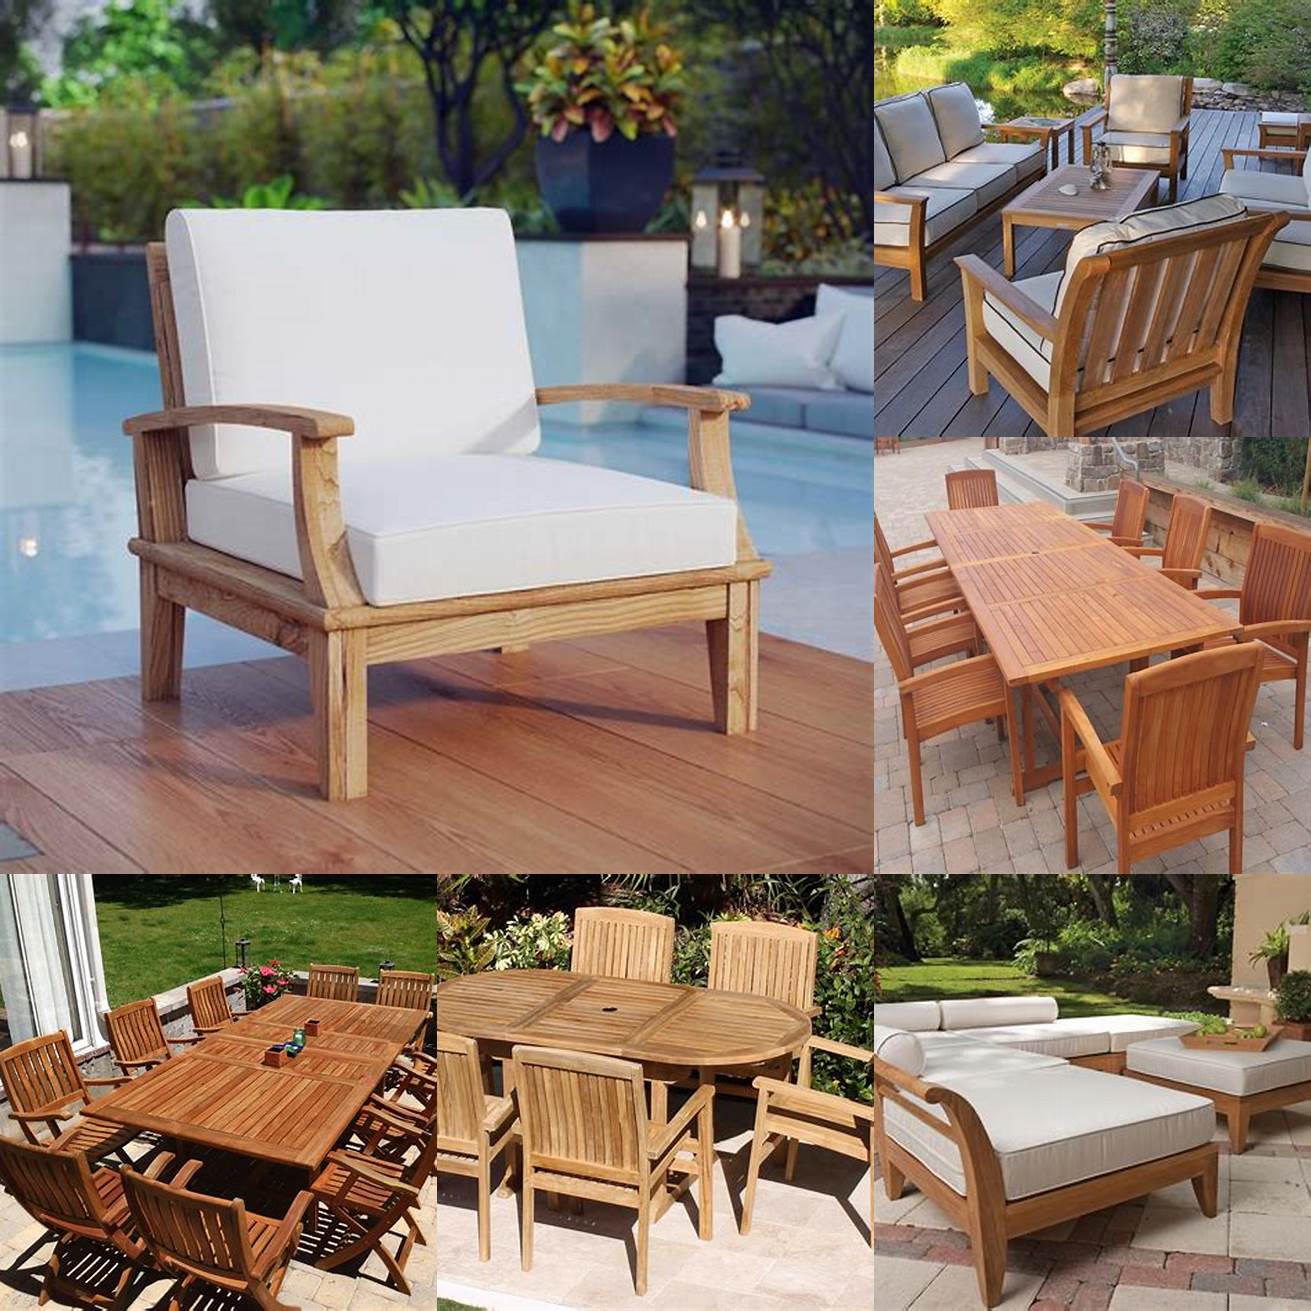 Teak Furniture For Outdoor Use